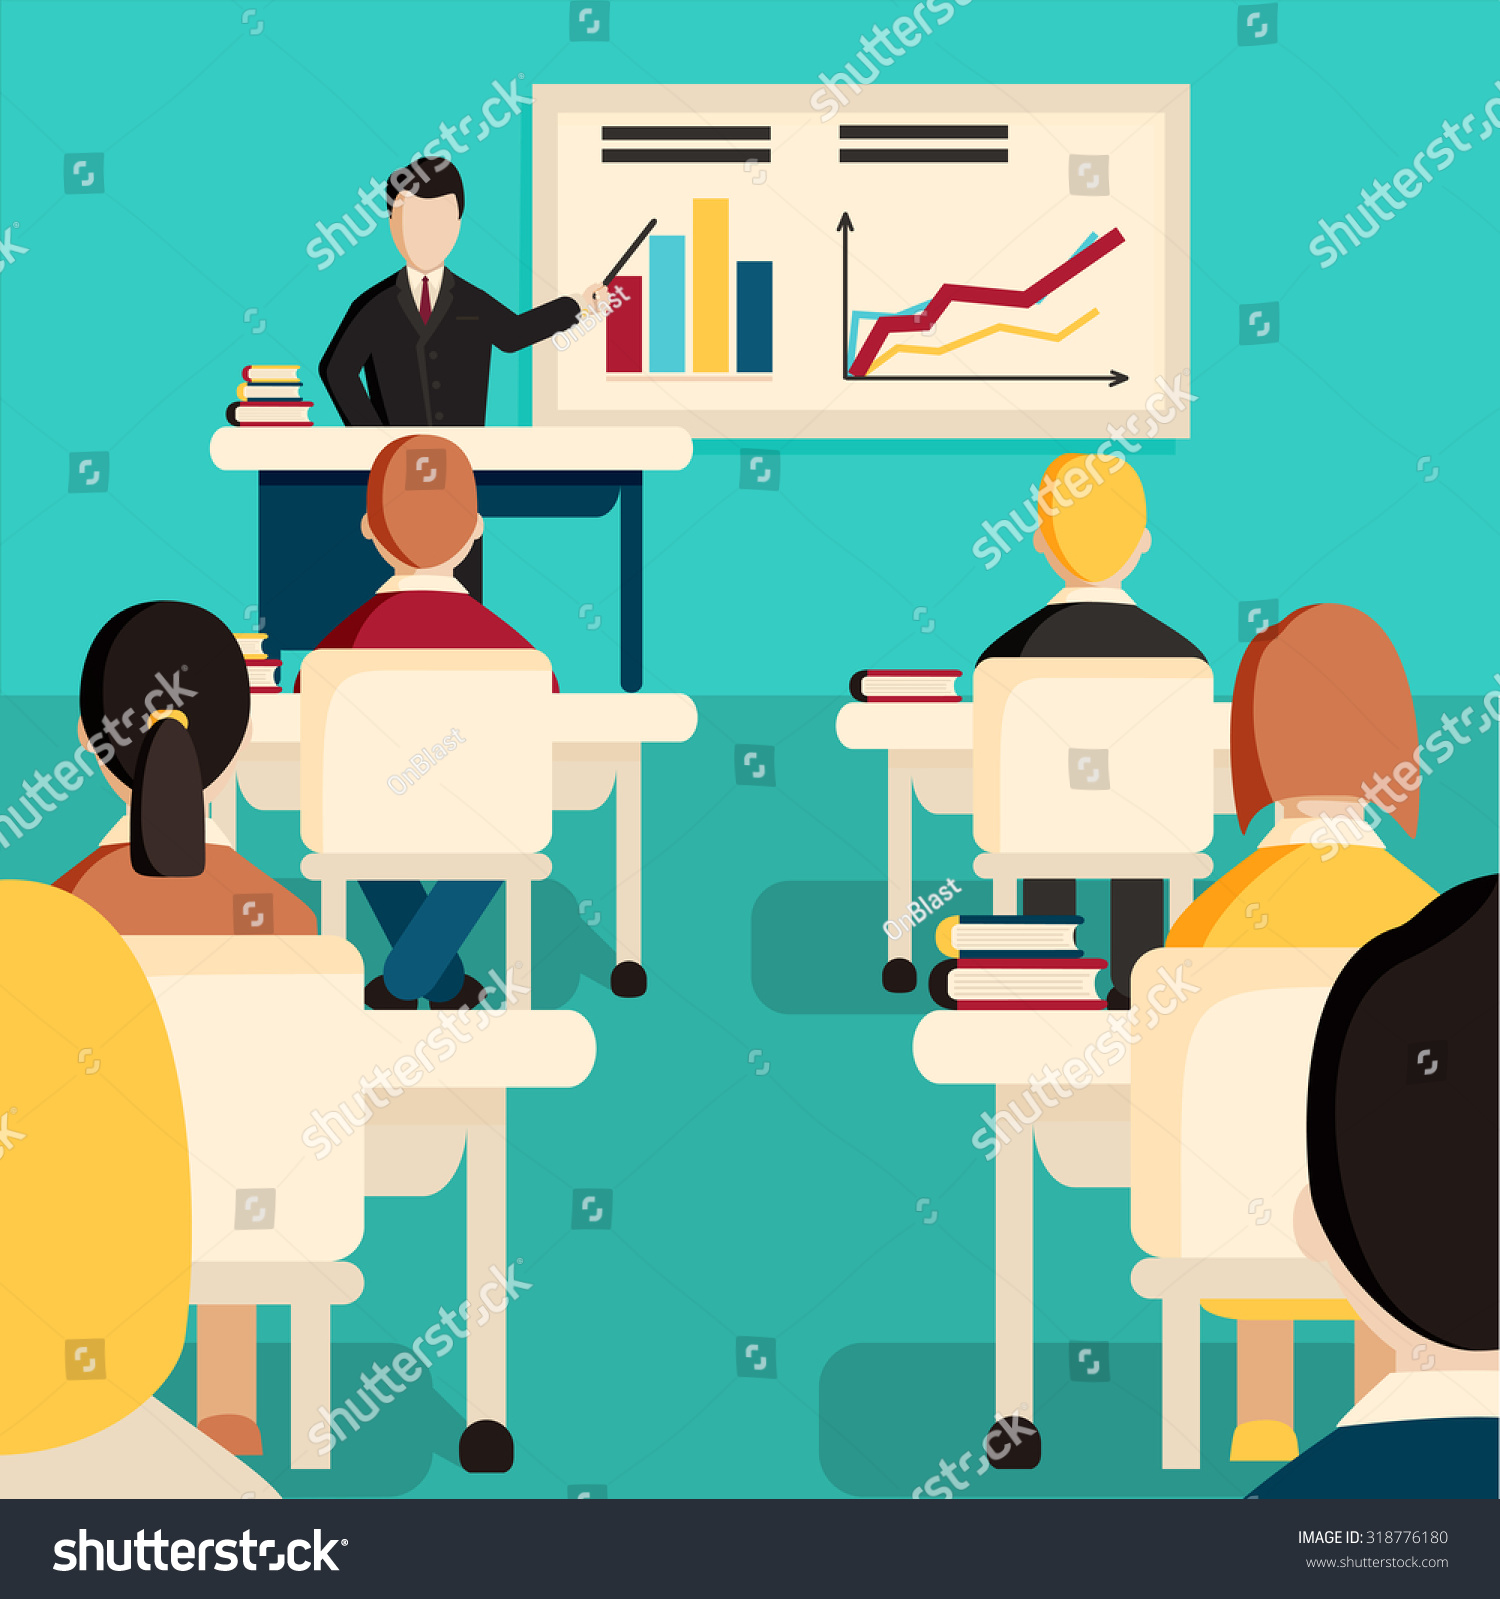 business education clipart - photo #15